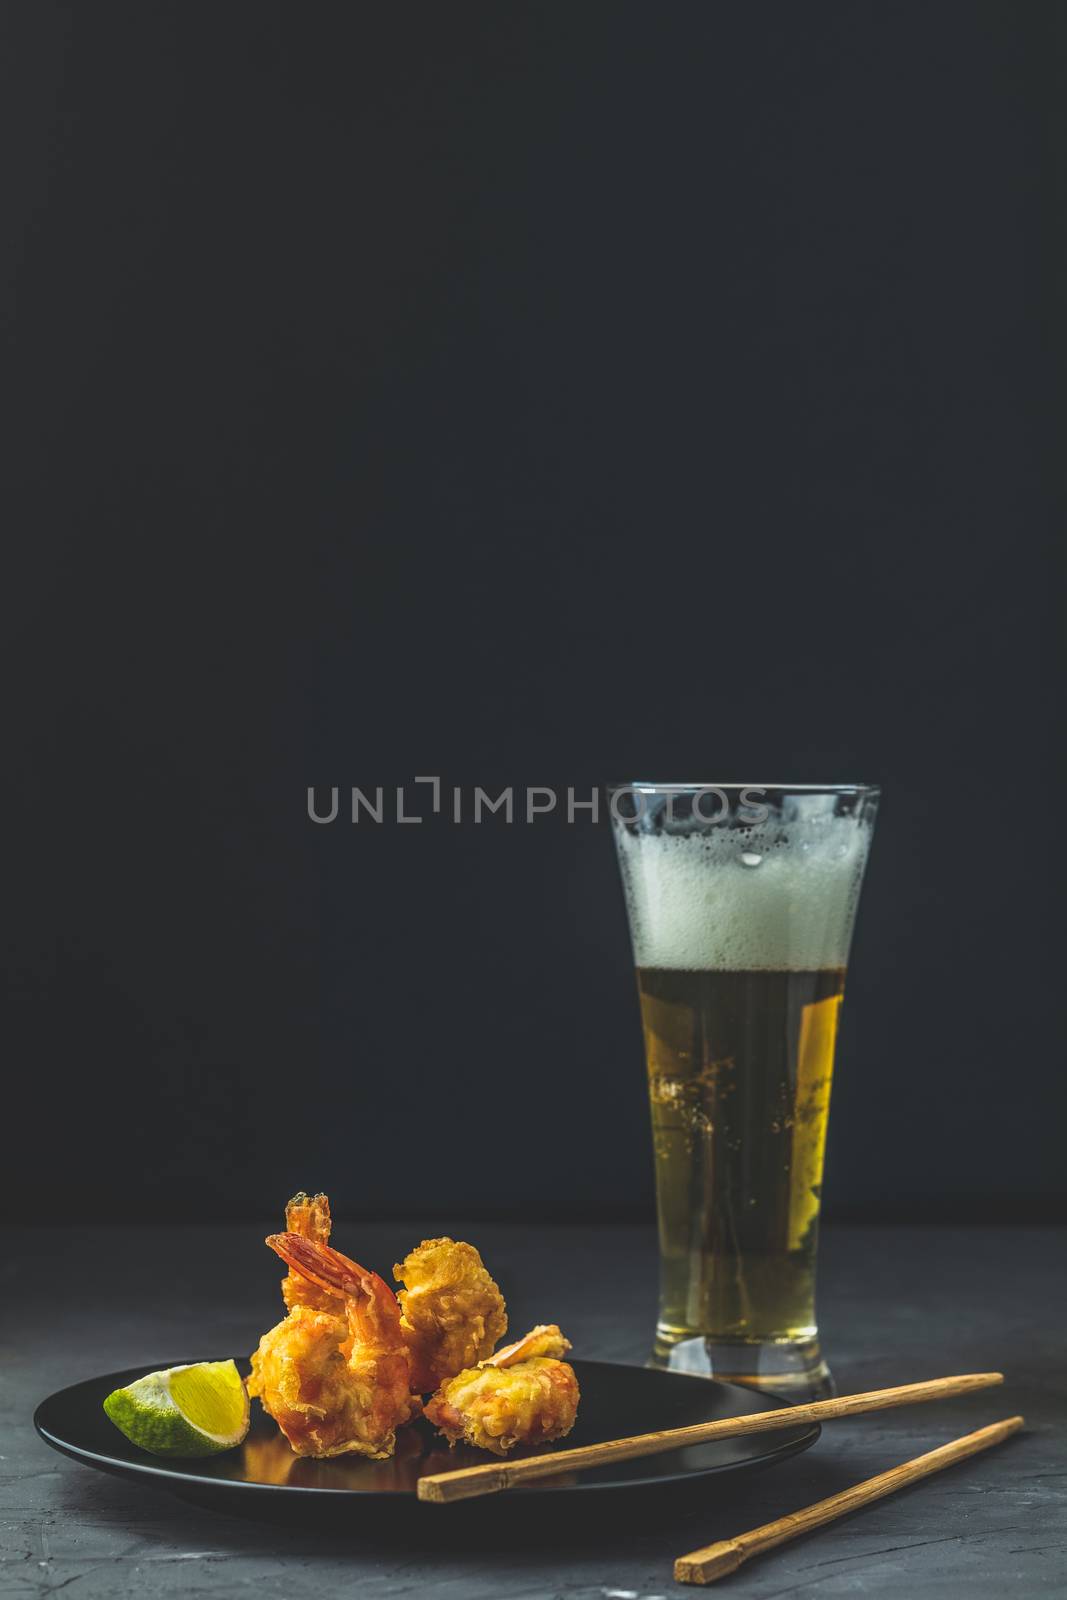 Fried Shrimps tempura and glass of beer  by ArtSvitlyna